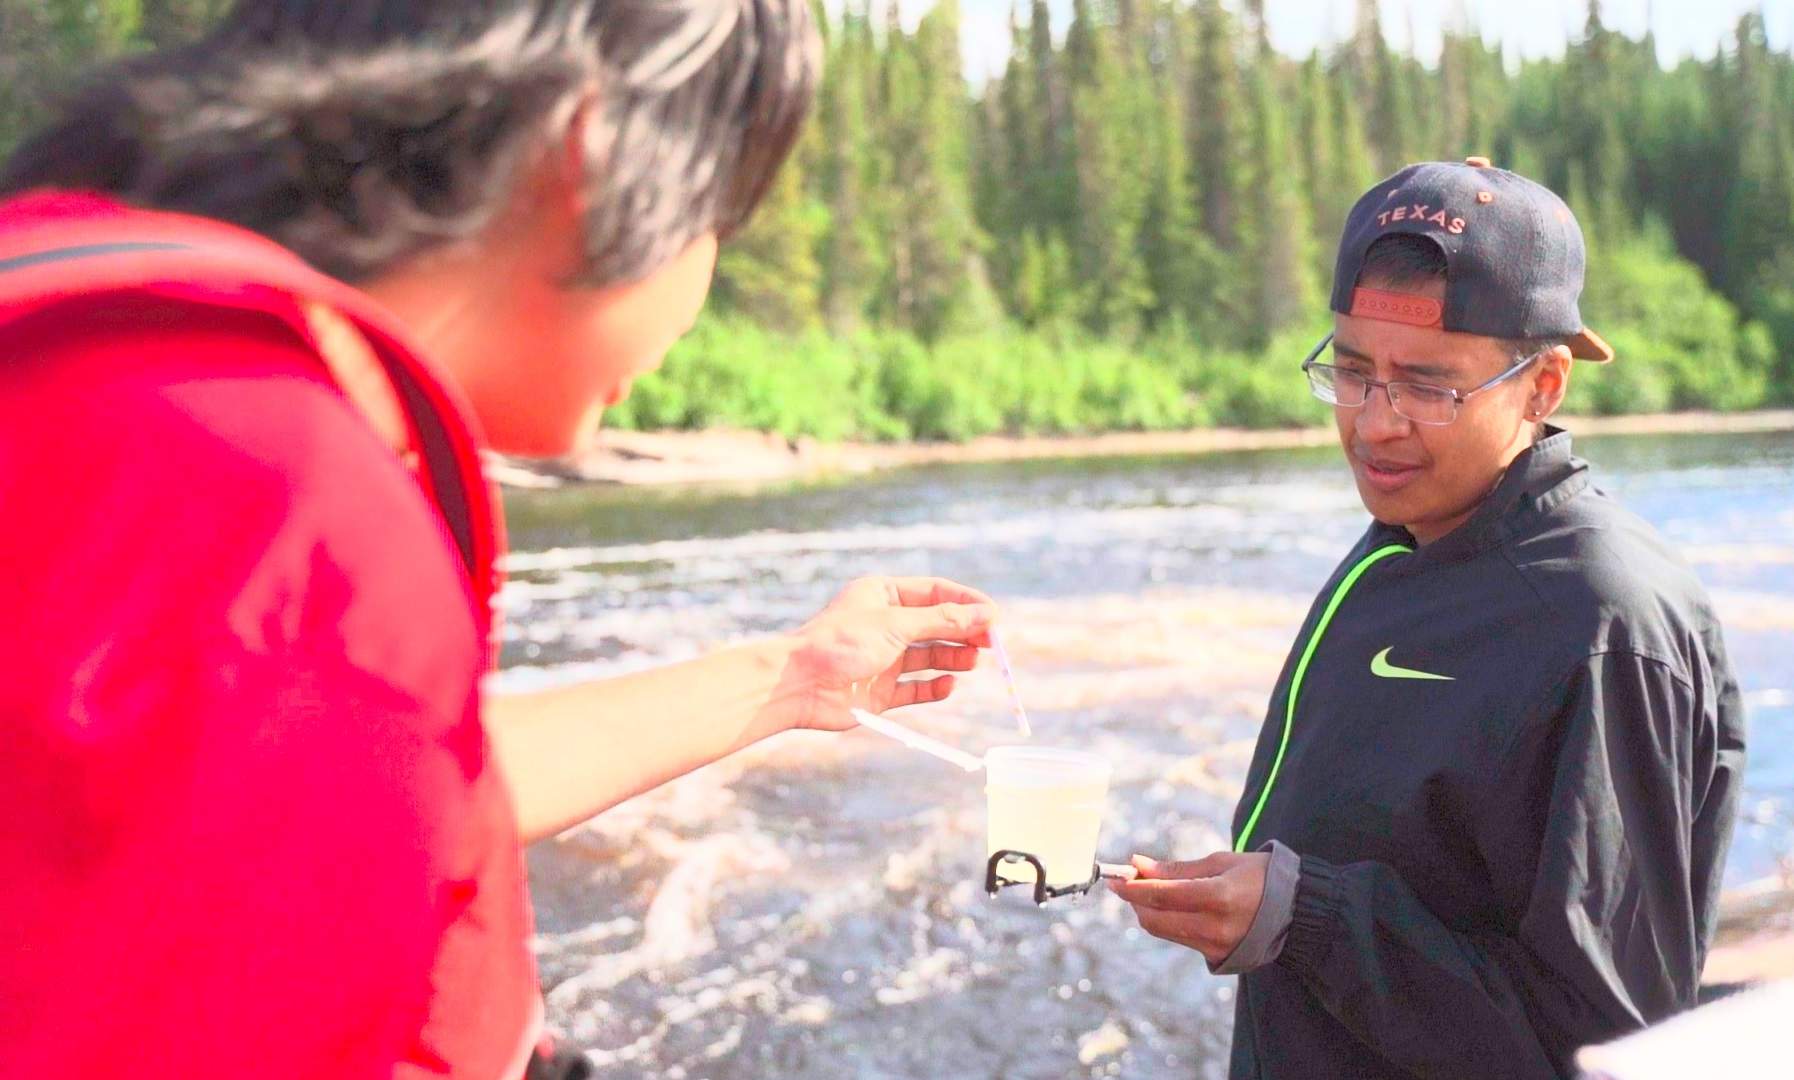 Water testing. Cree youth using the Water Rangers kit to test water from a river near